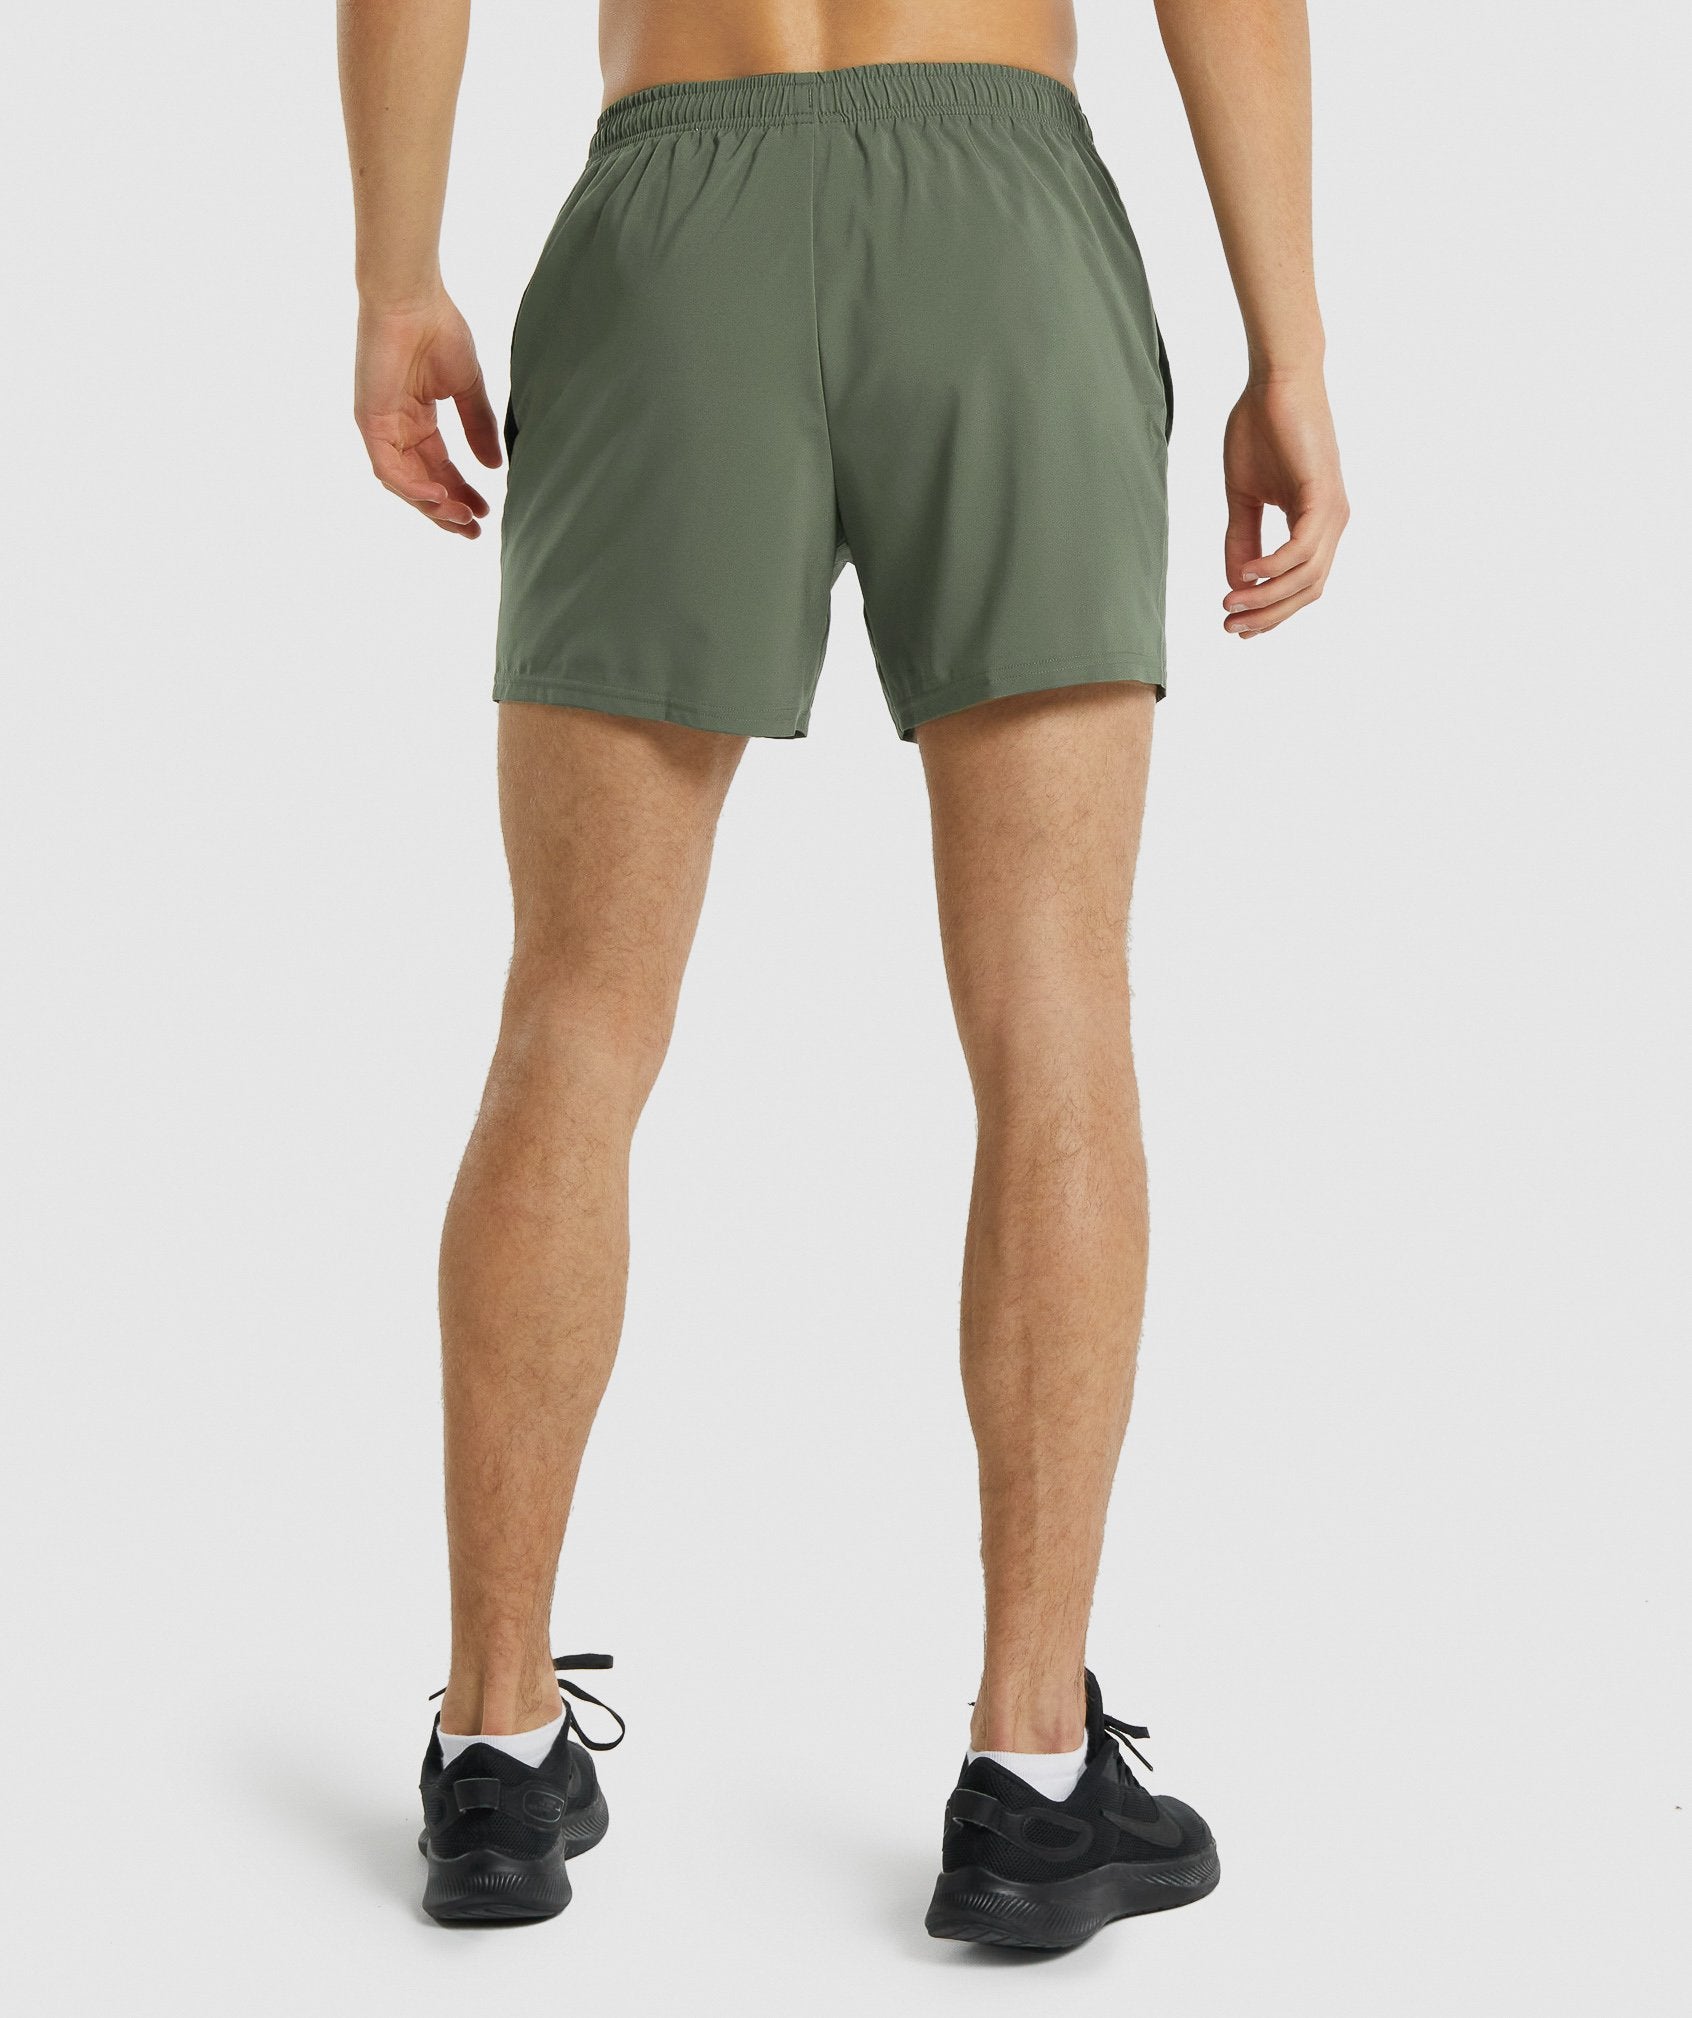 Arrival 5" Shorts in Green - view 2